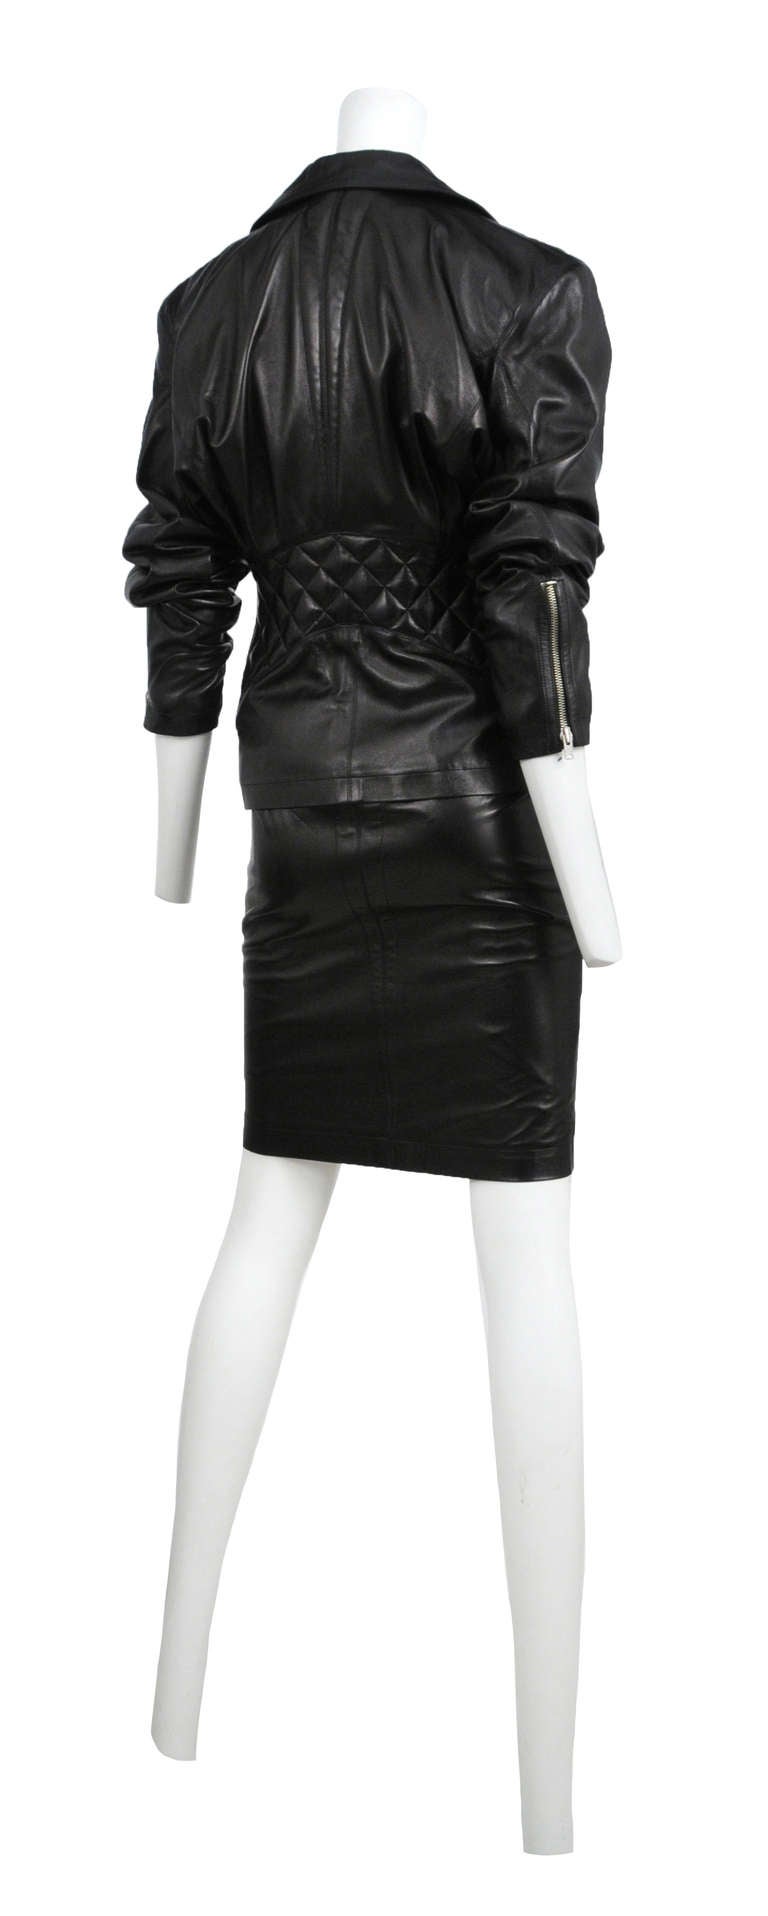 Azzedine Alaia black classic leather motorcycle suit in black lambskin with silver hardware. HIgh waisted pencil skirt with zipper detail paired with a fitted waist jacket with quilted detail at back.